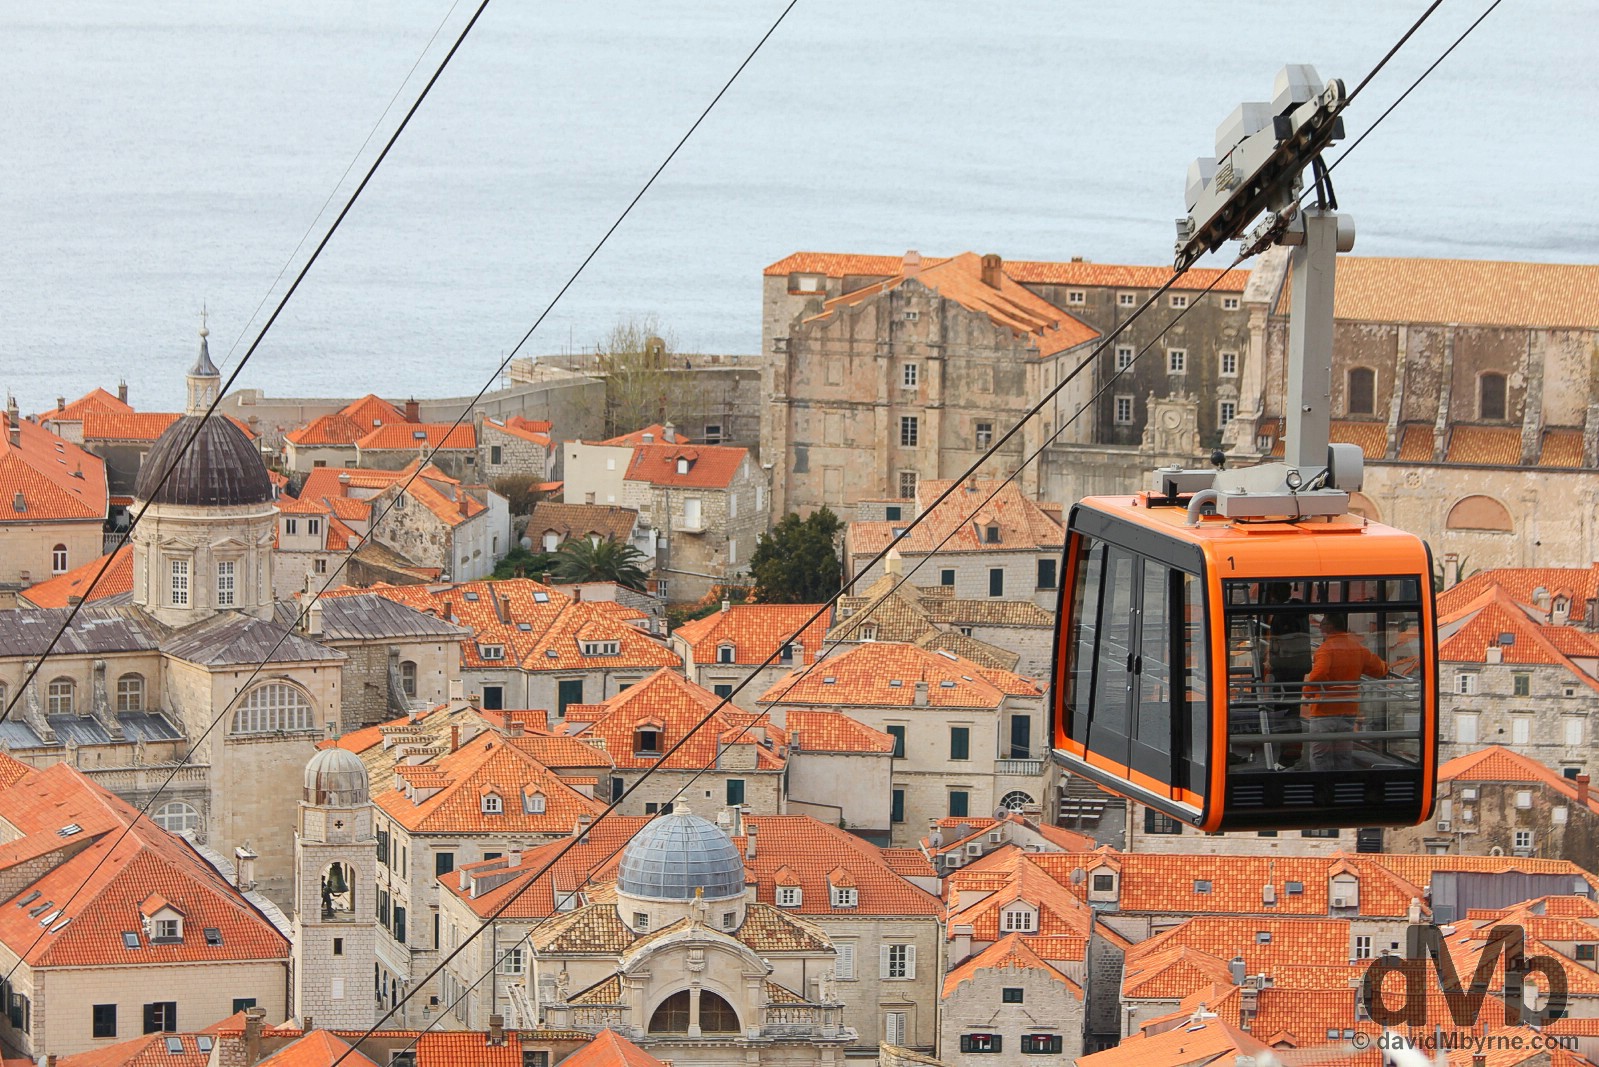 The Dubrovnik Cable Car over the rooftops of Old Town, Dubrovnik, Croatia. April 7, 2015.